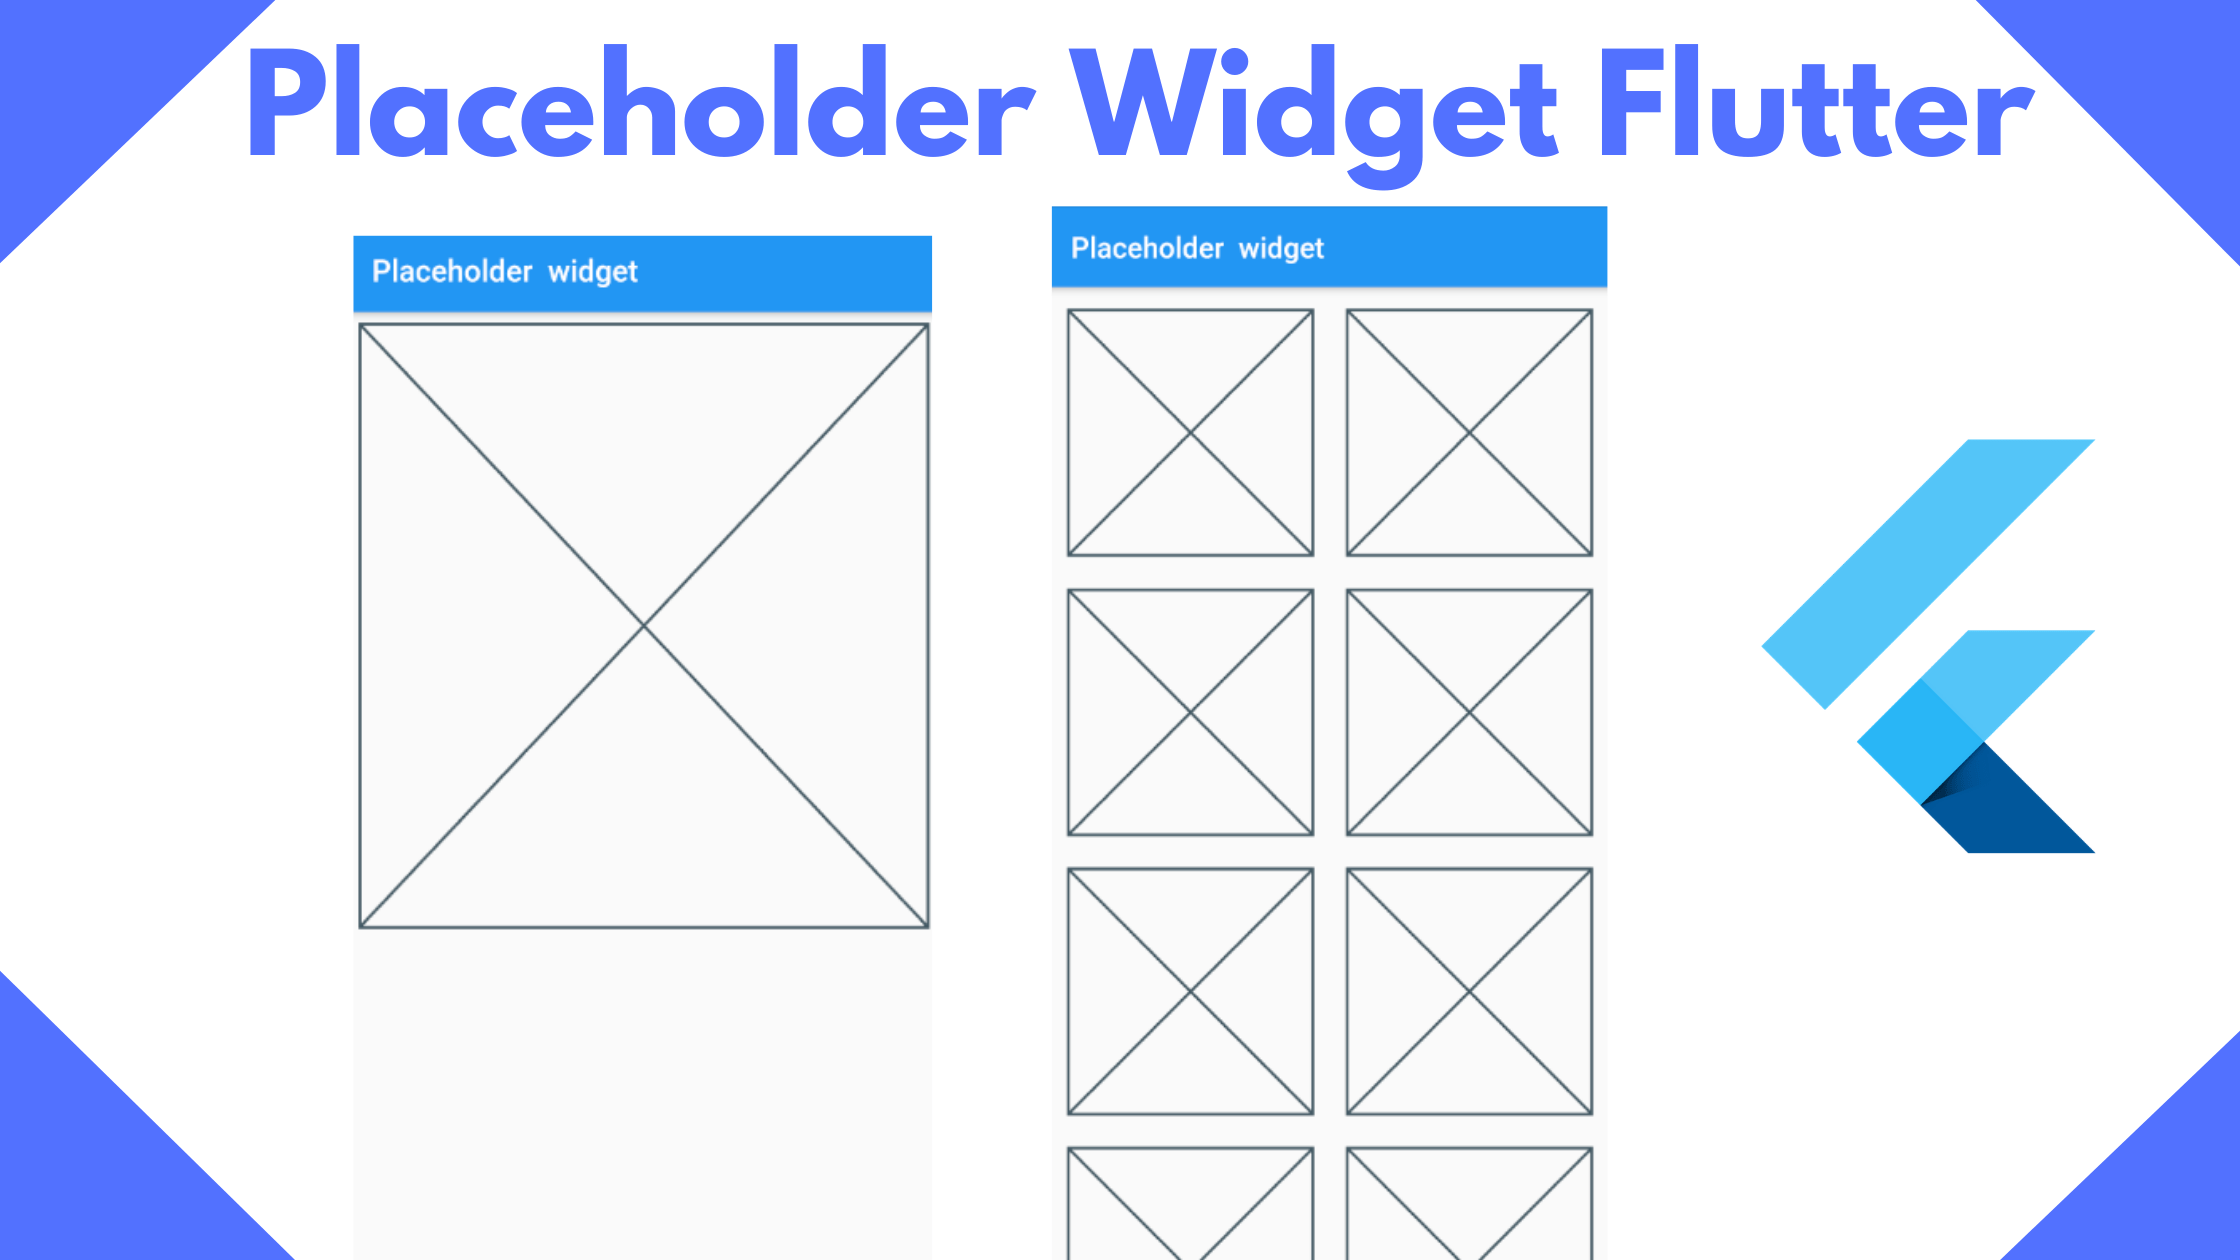 How to use Placeholder widget in Flutter